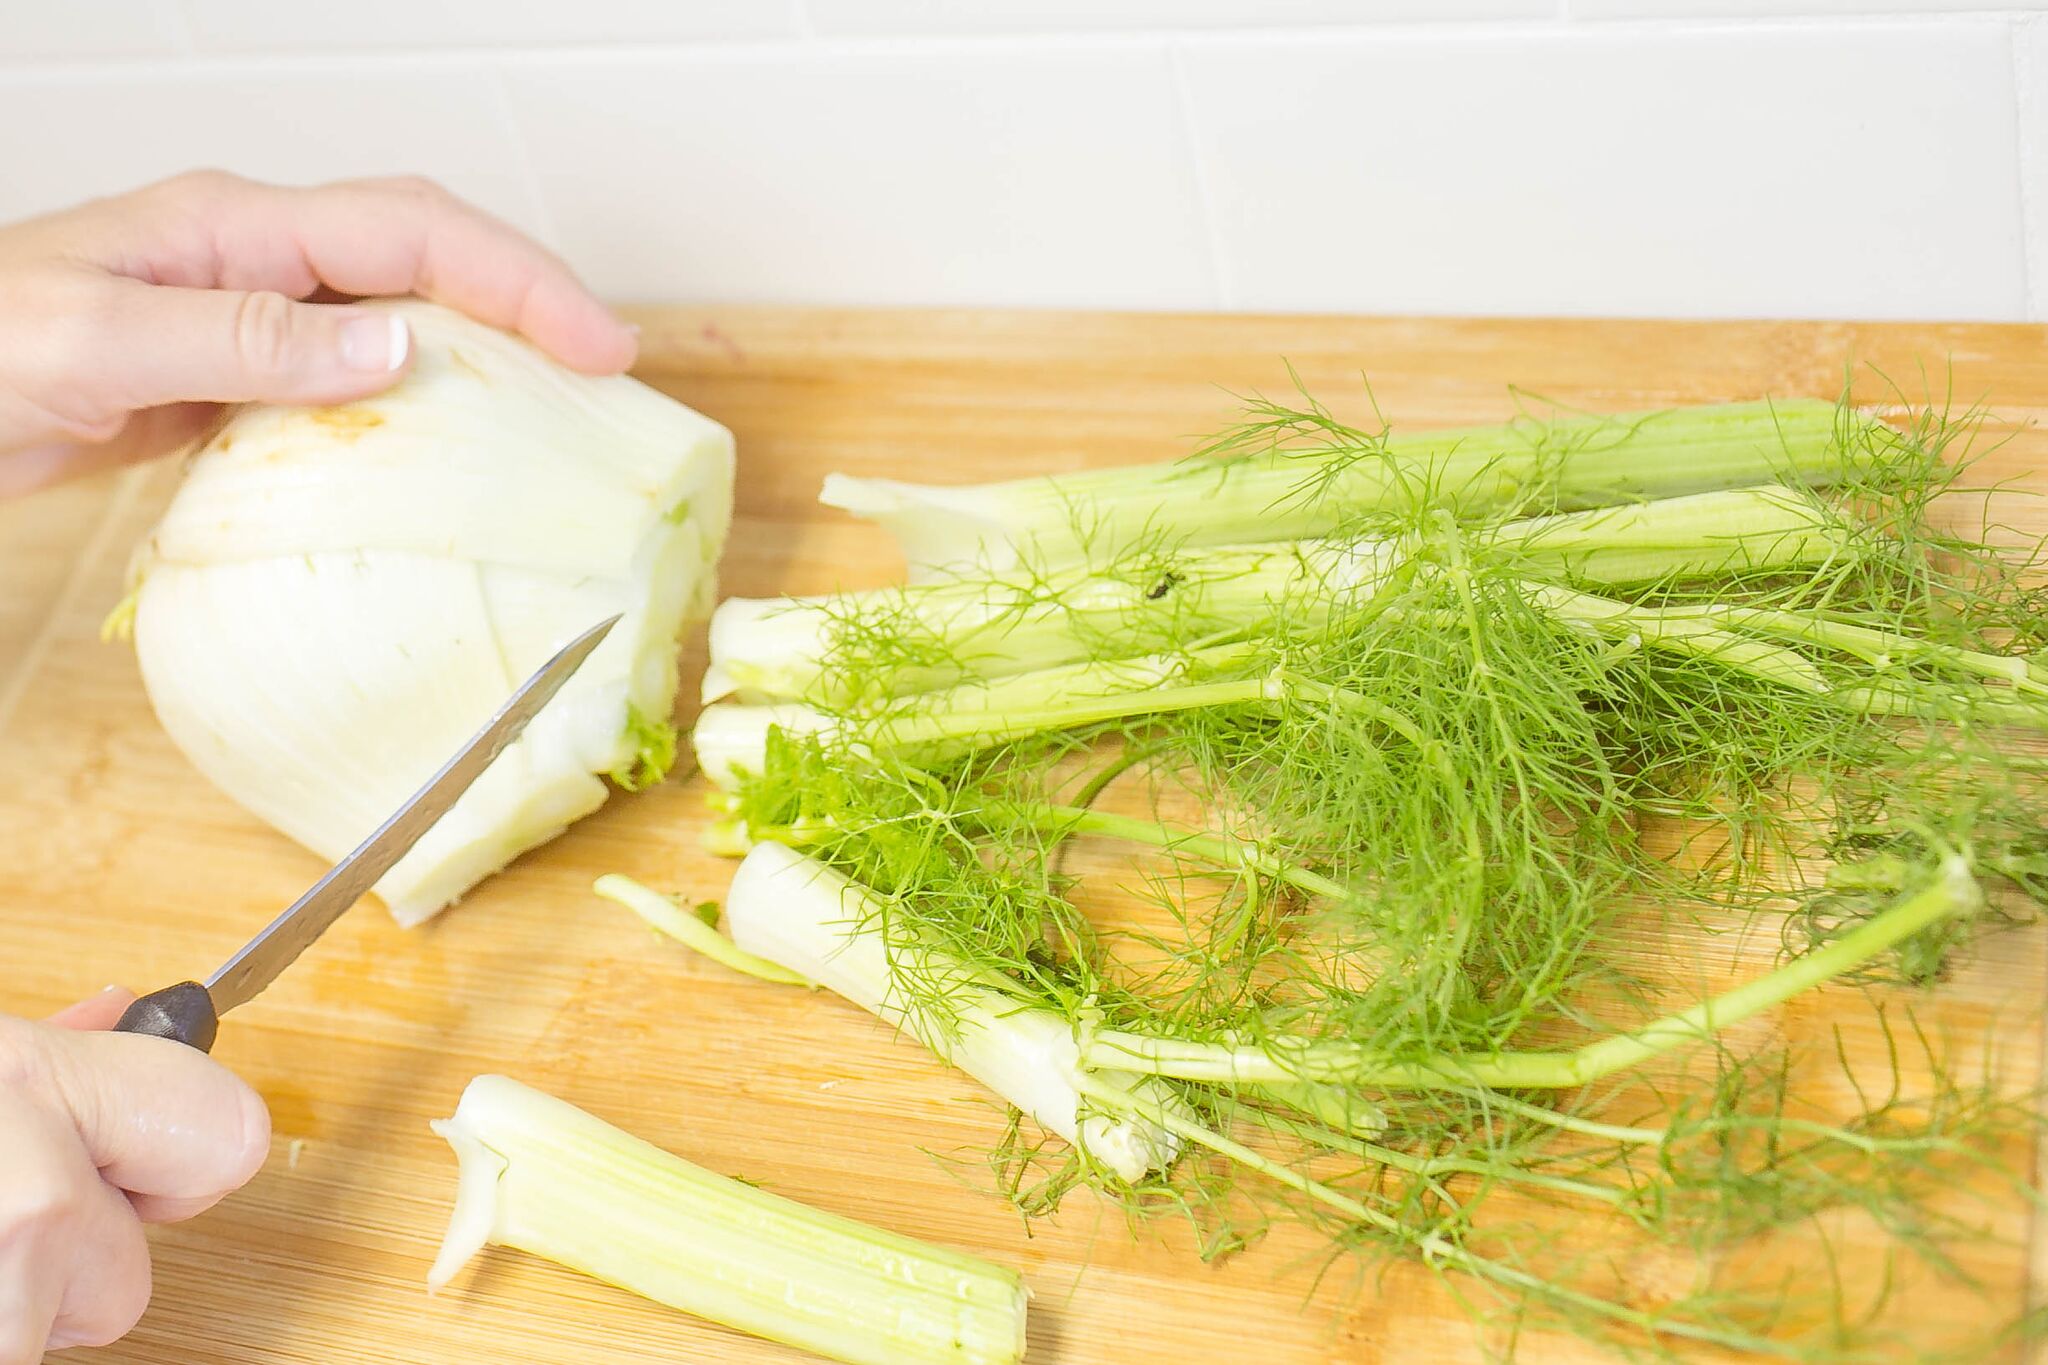 Cut fennel into sections